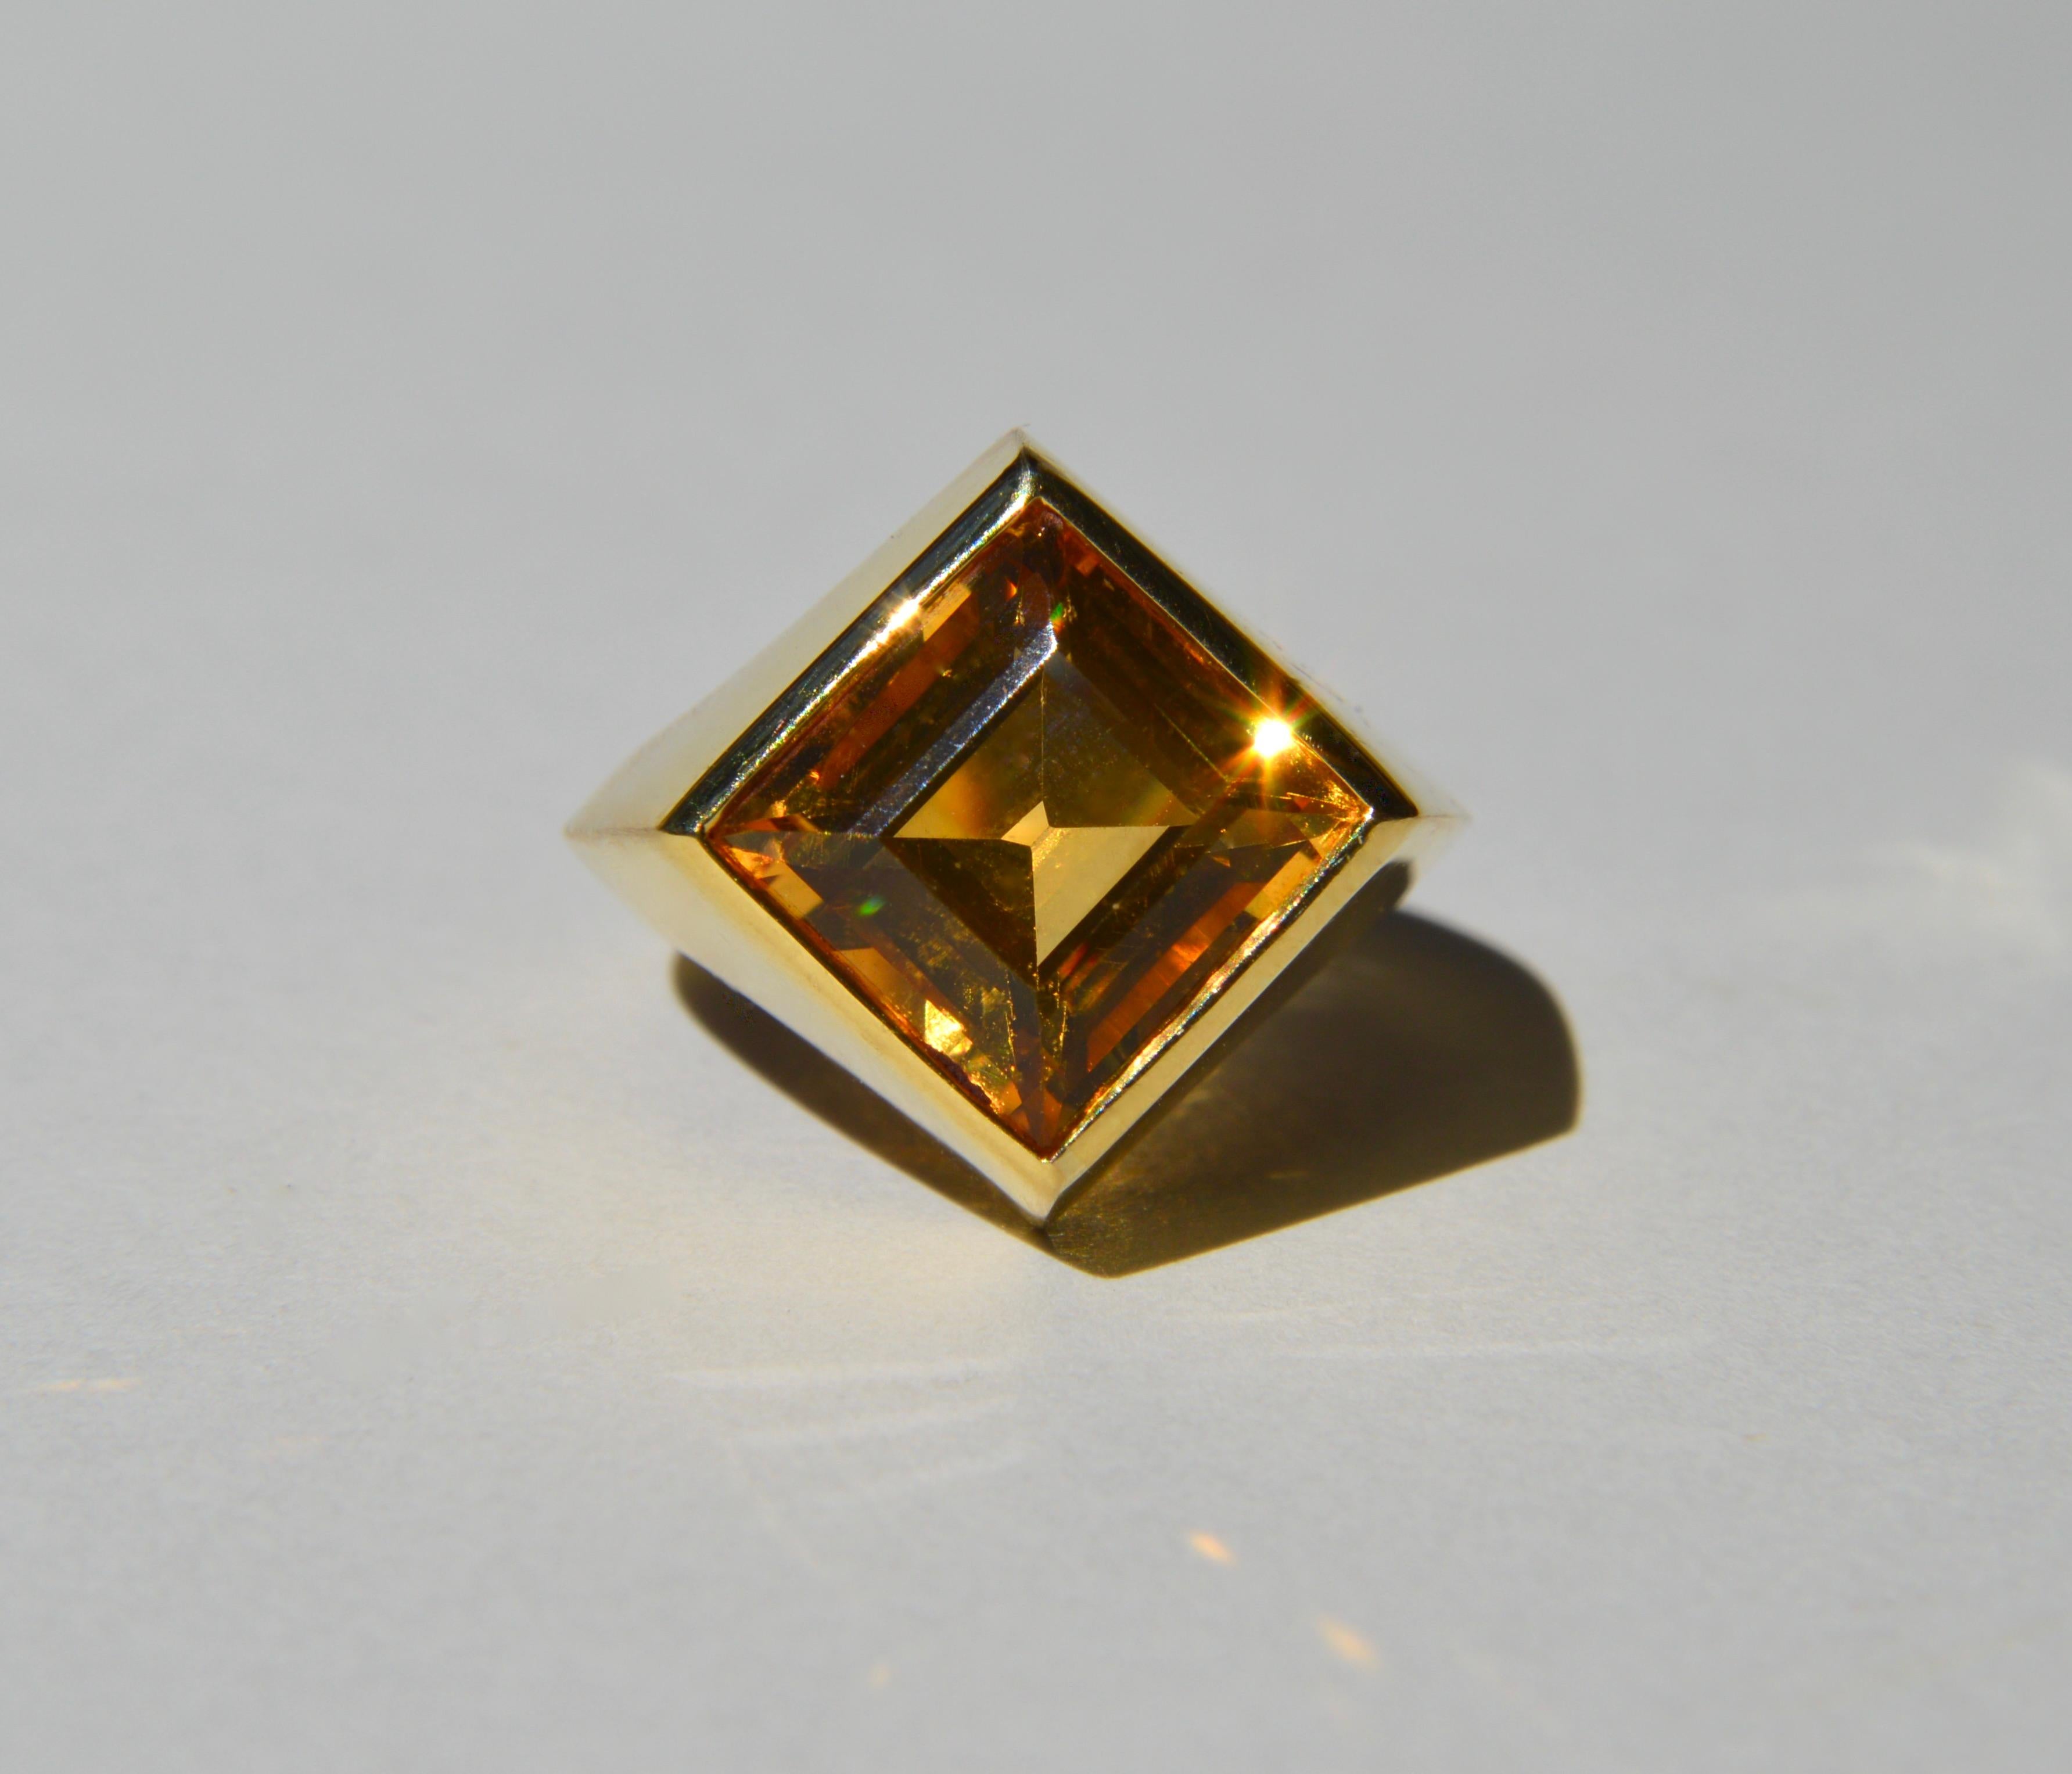 A magnificent vintage c1980s 18K yellow gold 5.62 carat genuine natural citrine princess cut cocktail ring. Size 6.25, can be resized by your local jeweler. In excellent condition. Marked and tested as 750 / 18K gold. Ring weighs 9.30 grams.

Called